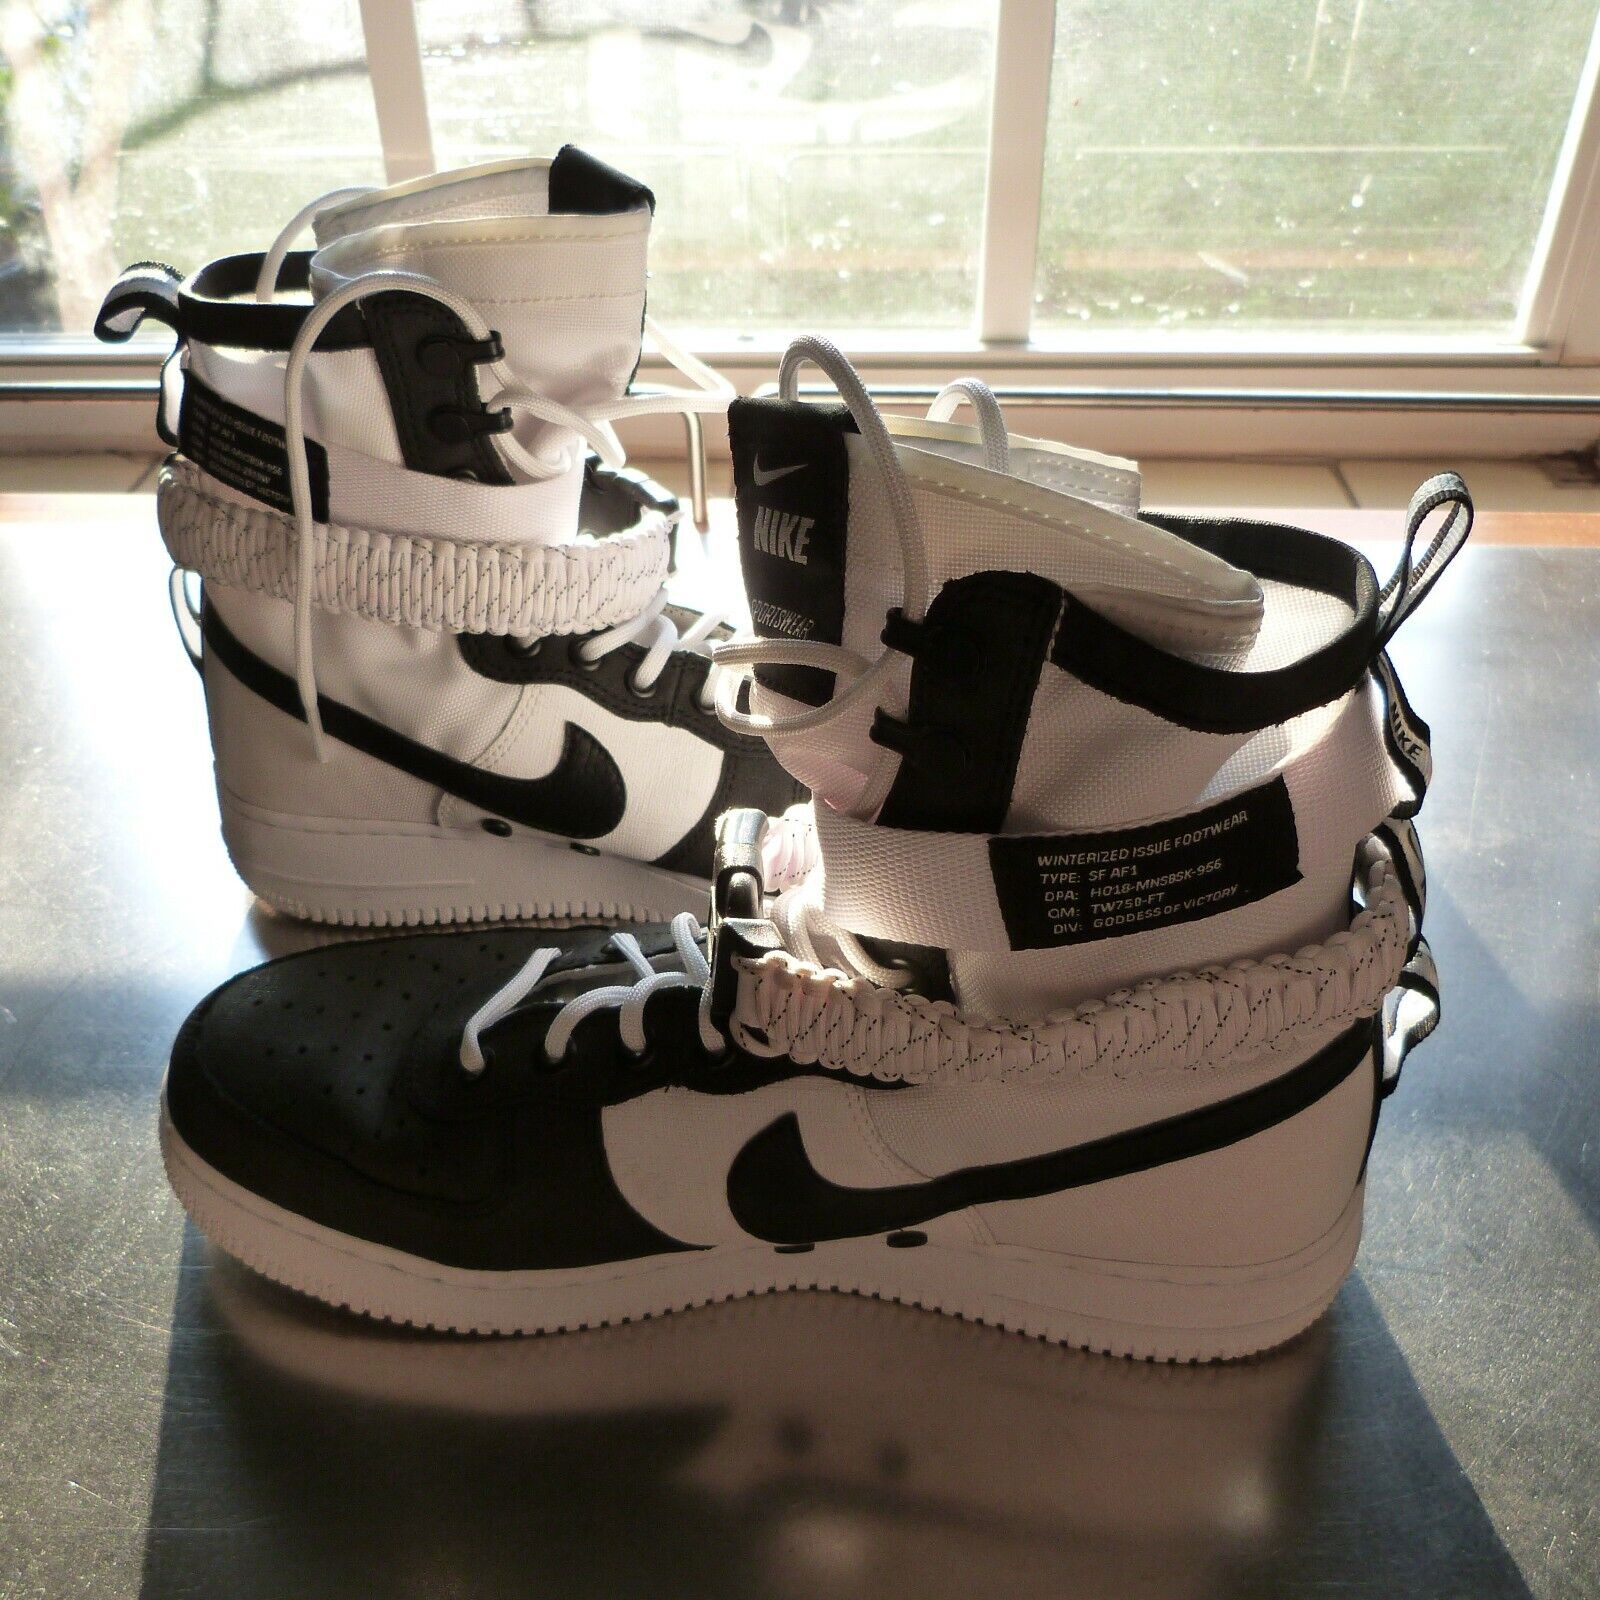 Extremely important Blind bolt Nike SF Air Force 1 High - Panda - US Men&#039;s Size 9 (no box) | eBay